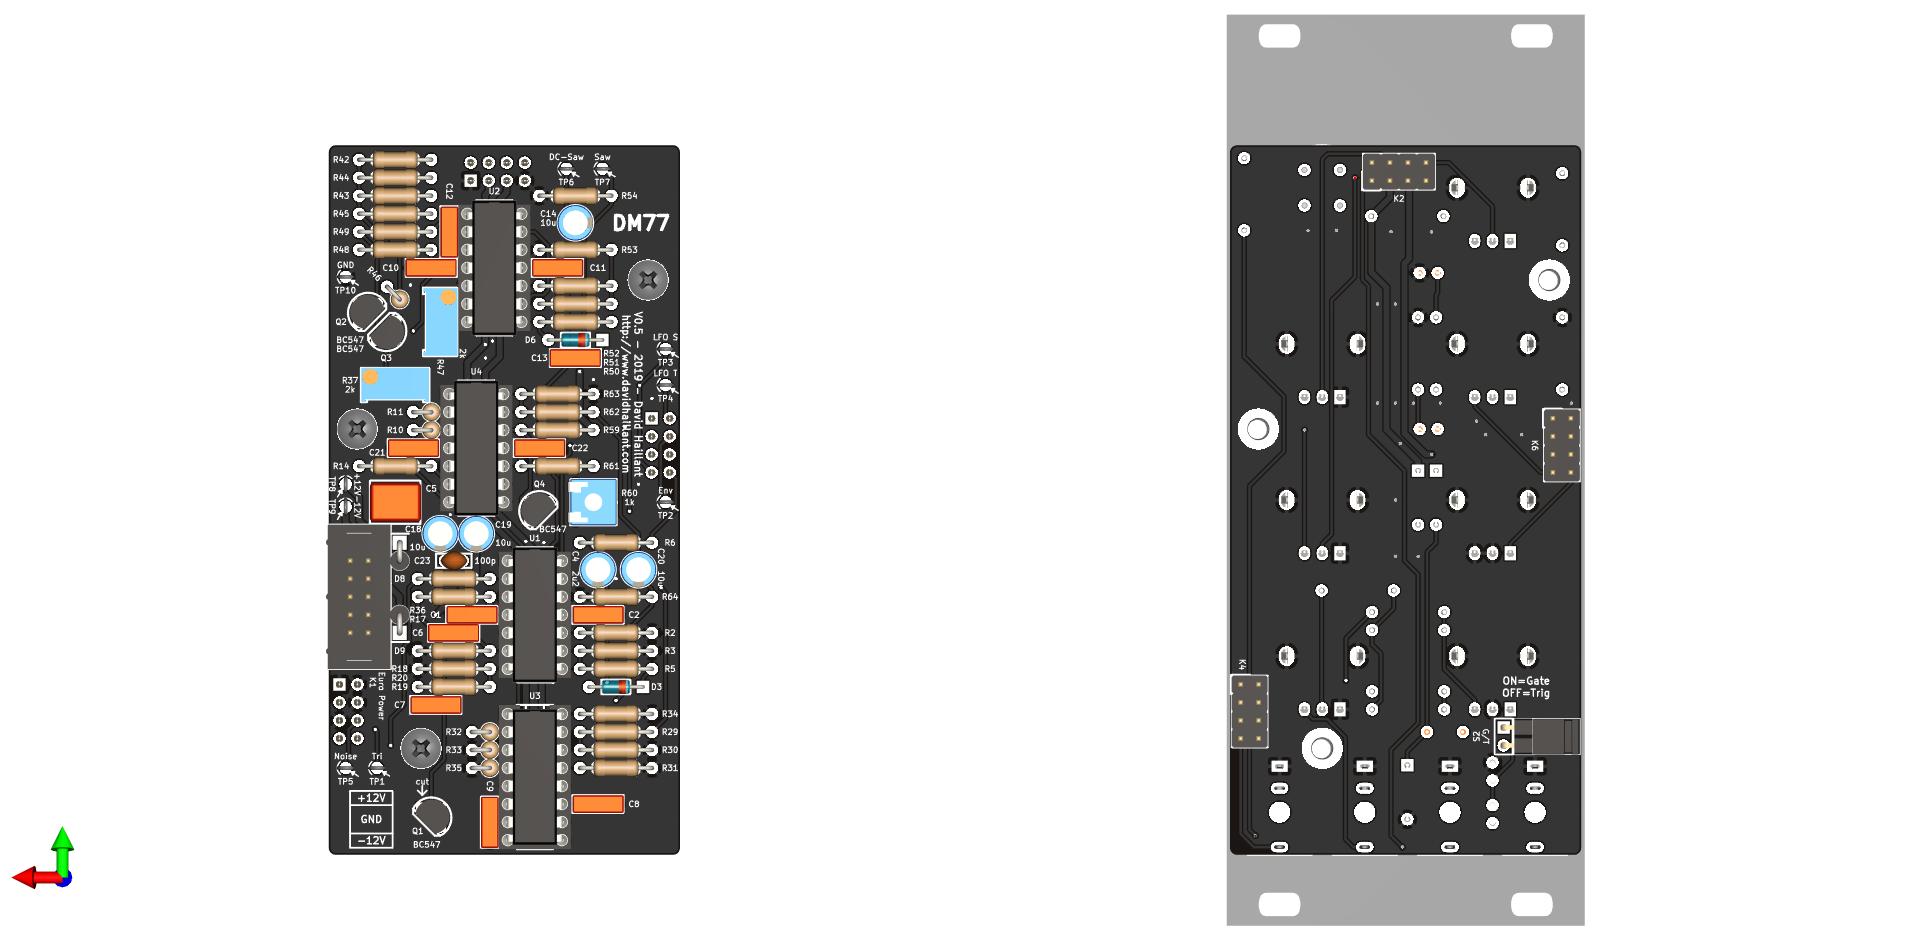 Rear PCB on the left, Front PCB mounted on the front panel on the right